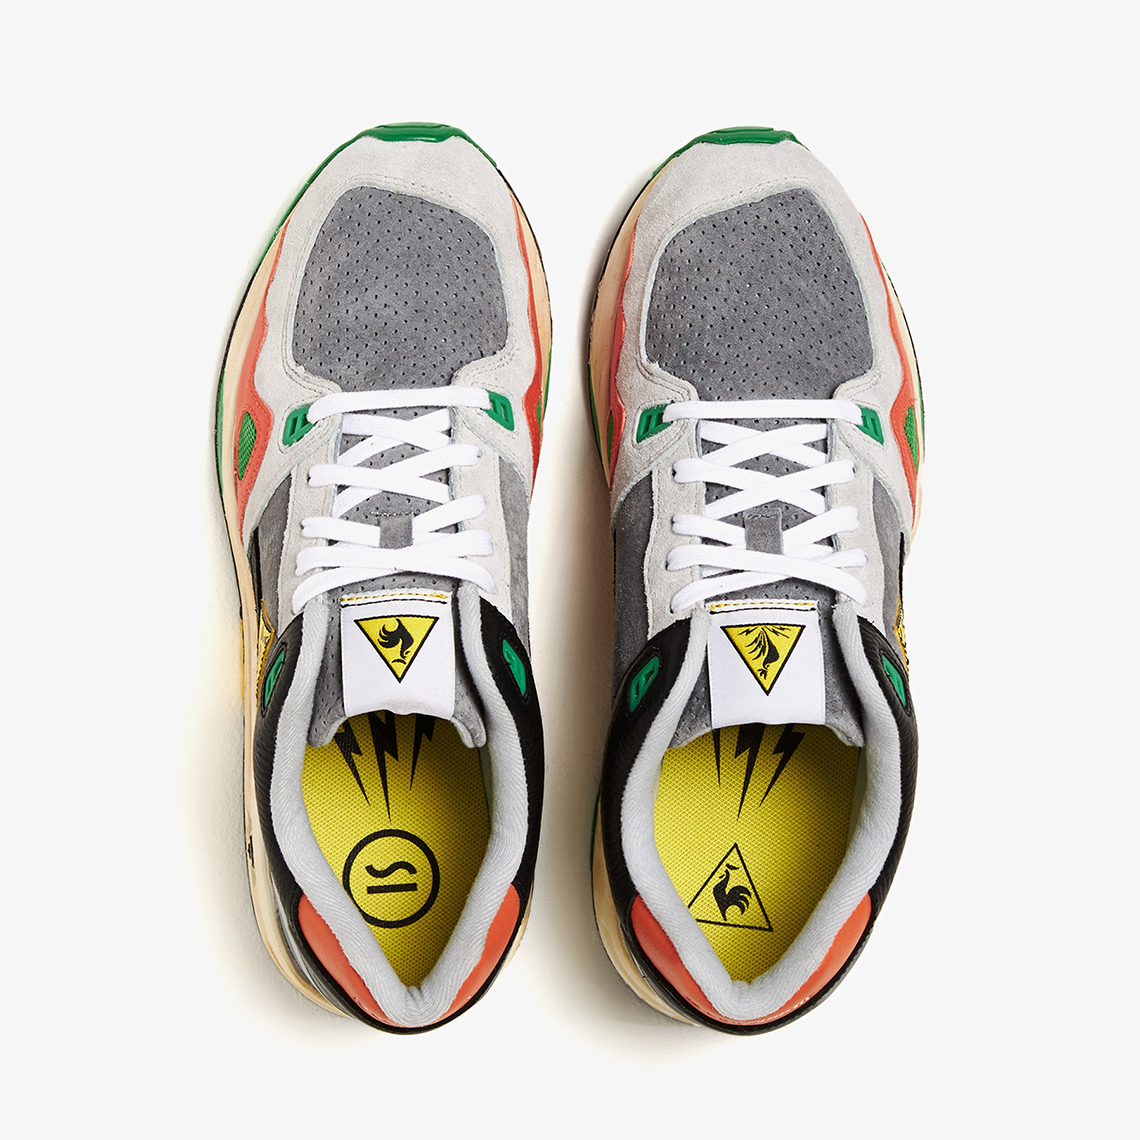 Svd Le Coq Sportif Lcs R1000 Energy Rooster 9